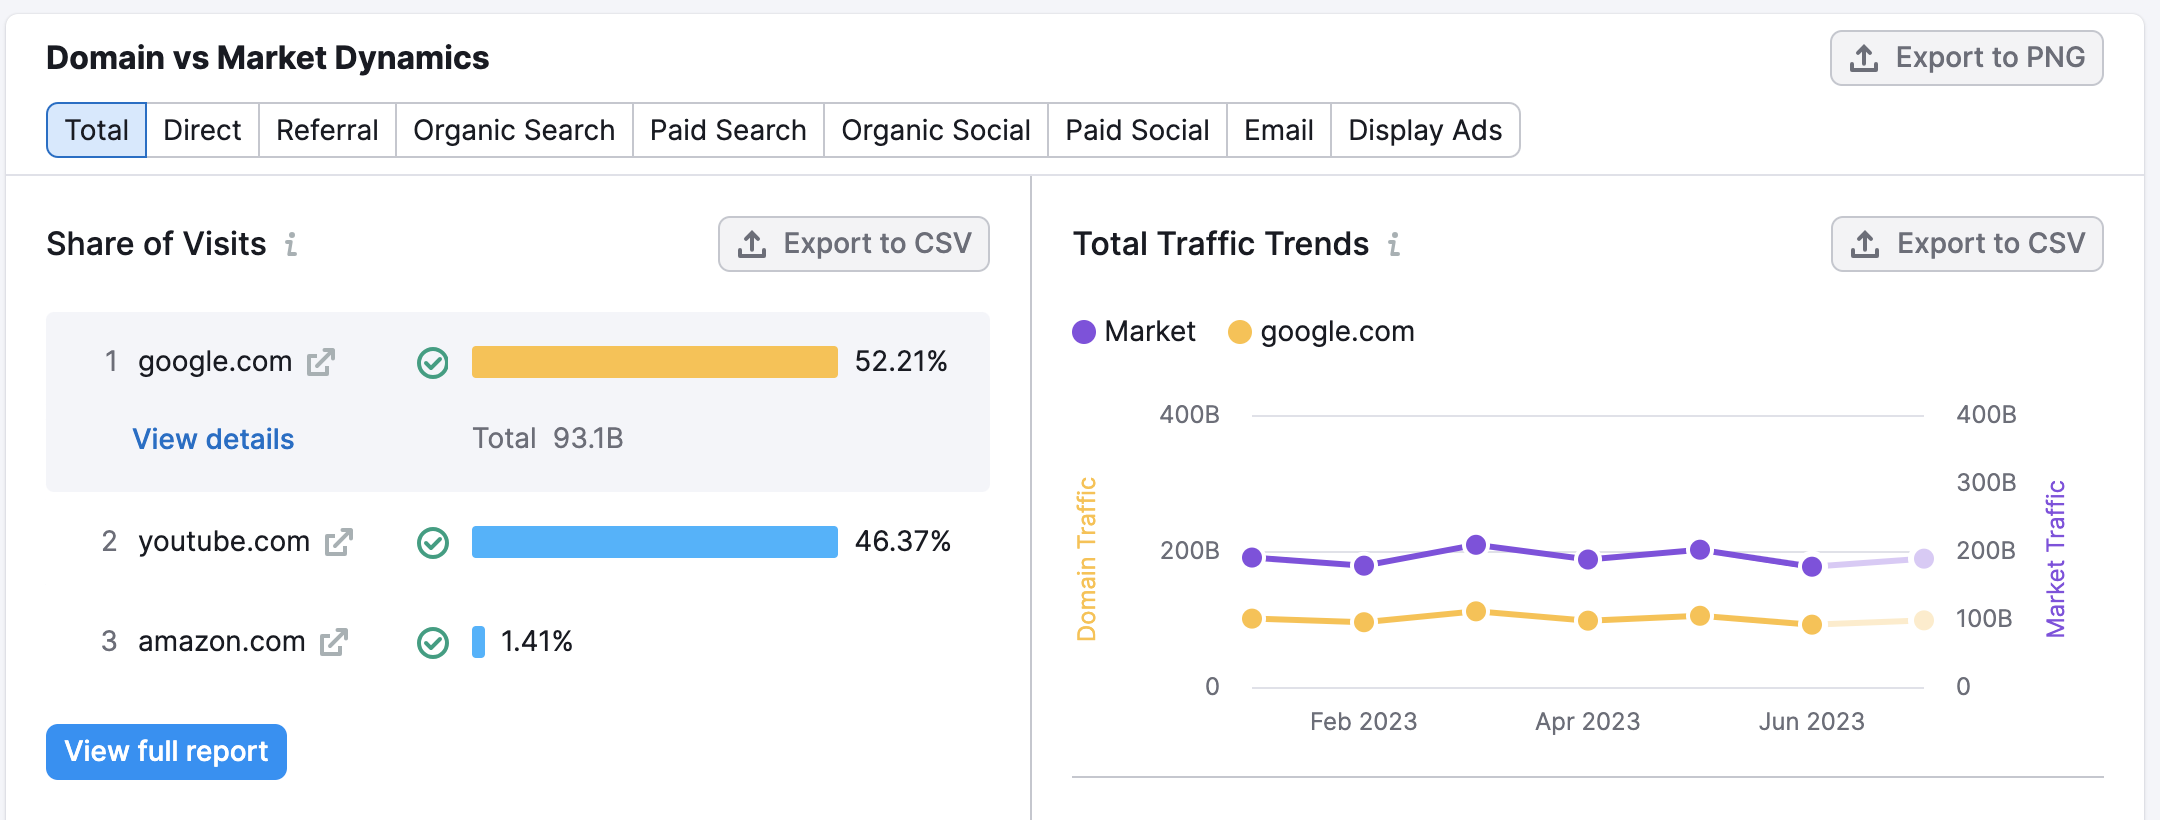 An example of several Domain vs Market Dynamics report. Two widgets are presented: Share of Visits and Total Traffic Trends.